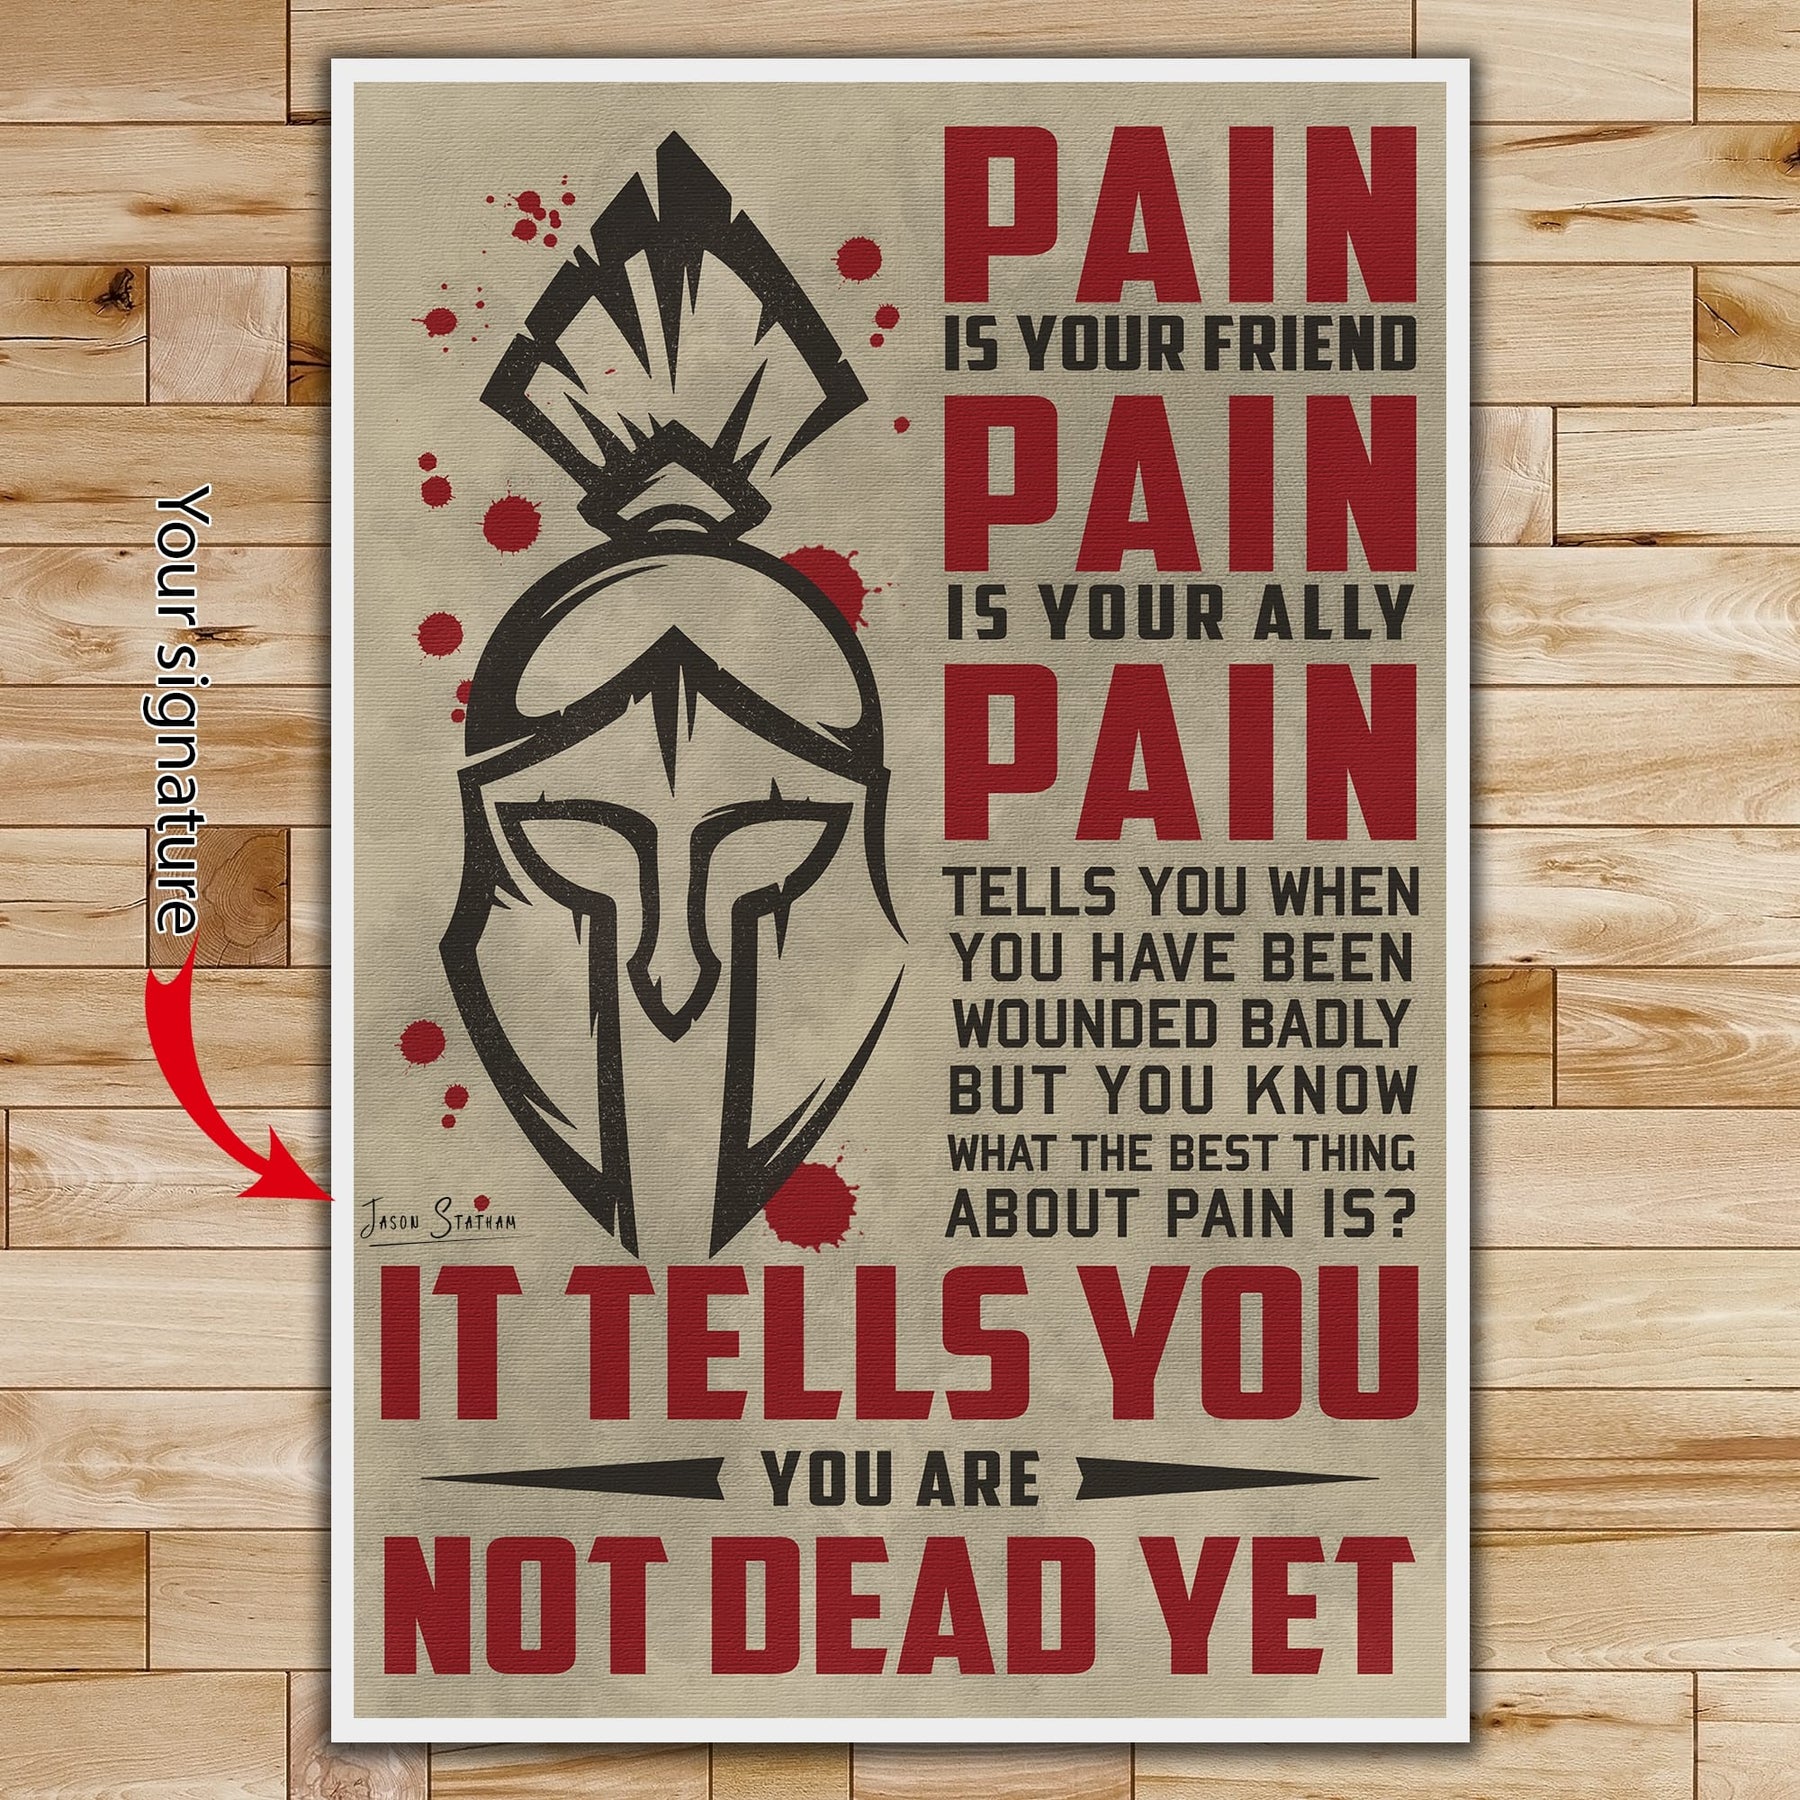 WA015 - PAIN - It Tells You - You Are Not Dead Yet - Spartan - Vertical Poster - Vertical Canvas - Warrior Poster